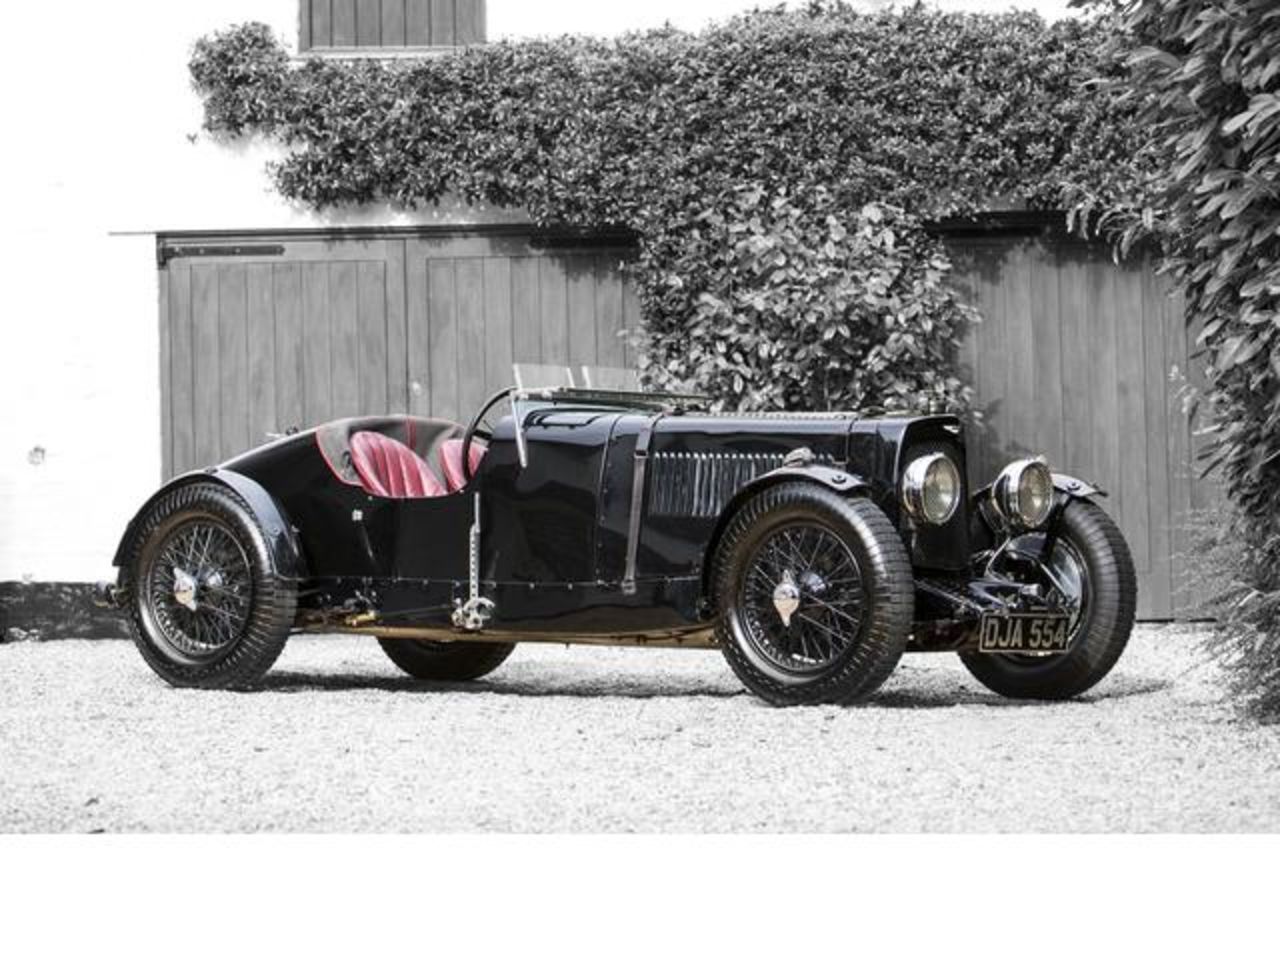 This Aston Martin "Ulster" built in 1934 went for a princely $2.13 million. A replica of the company's 1934 racing team car, it was made available to amateur racers for just over $1,000 at the time.